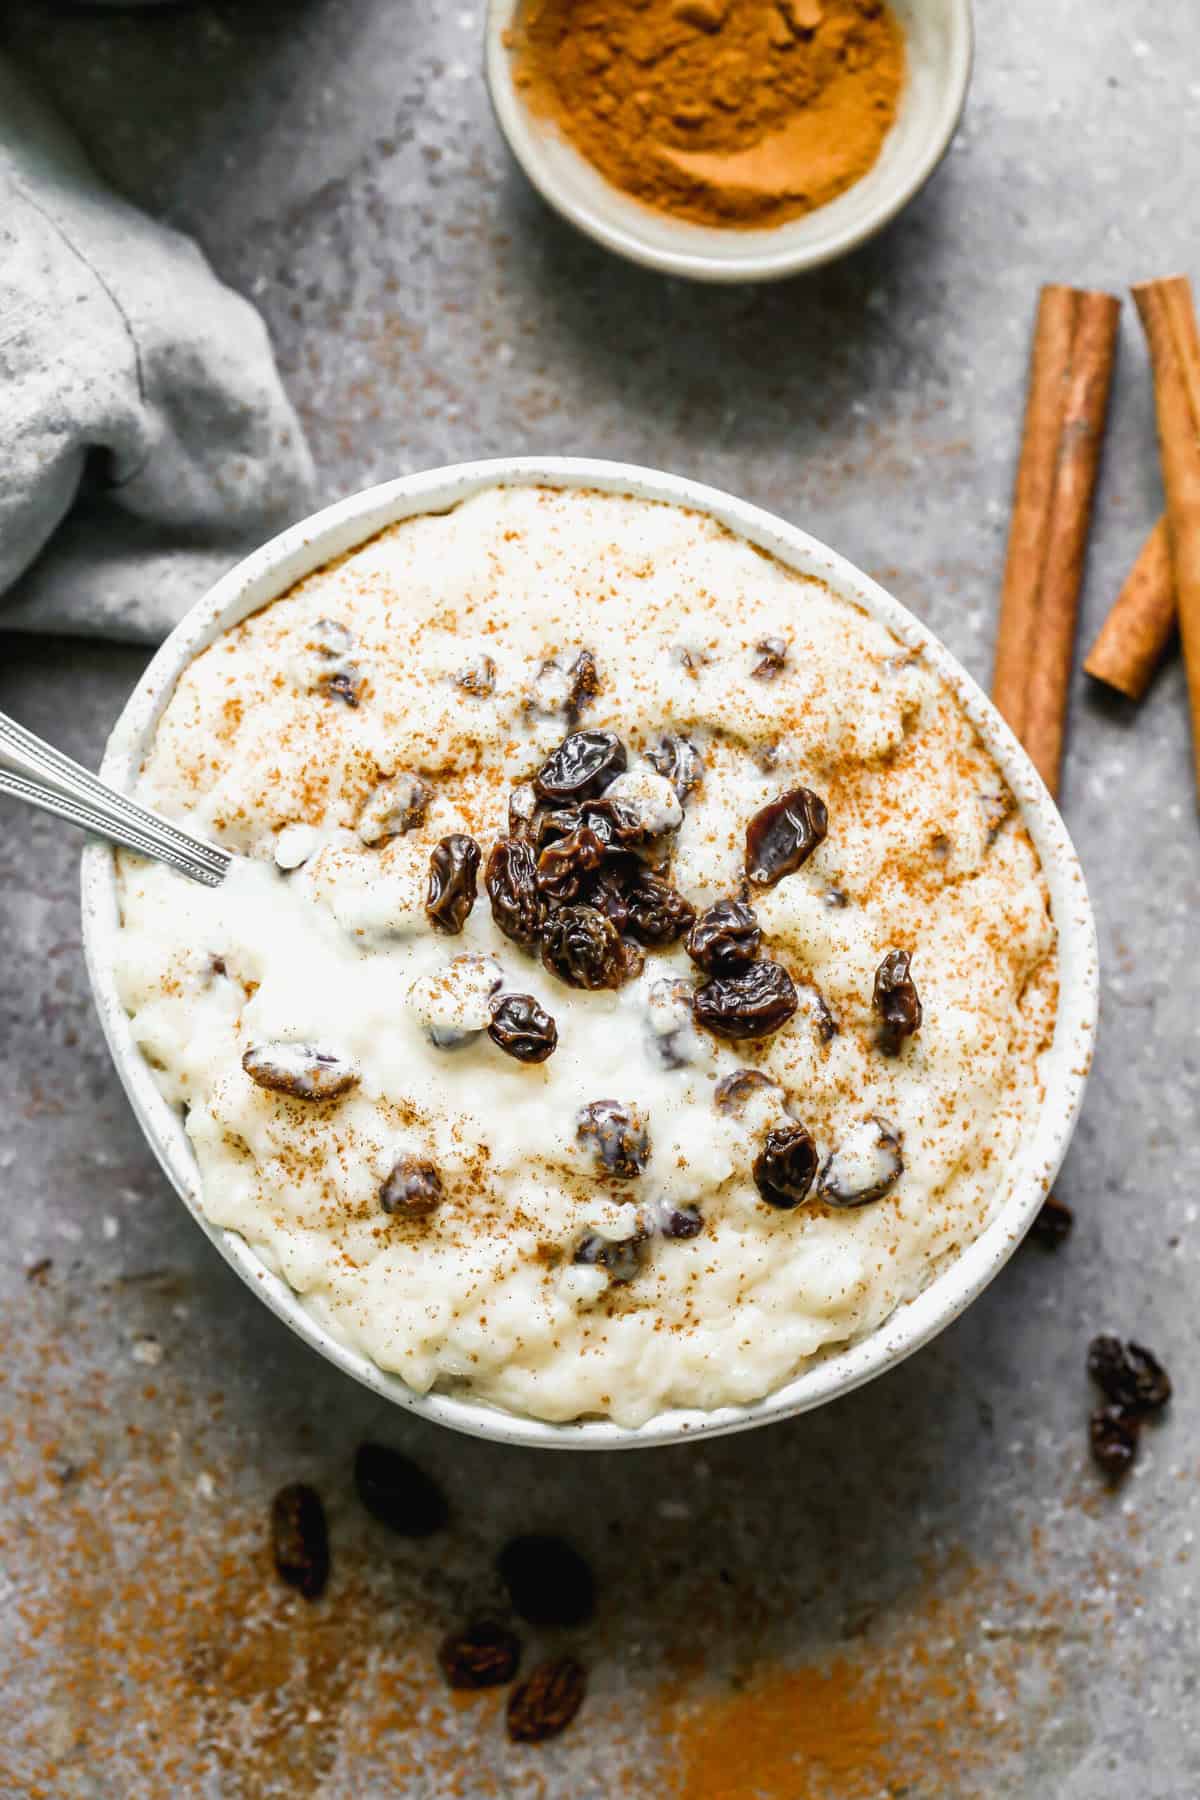 Arroz con Leche receta in a bowl with a dusting of cinnamon sugar and topped with some raisins.